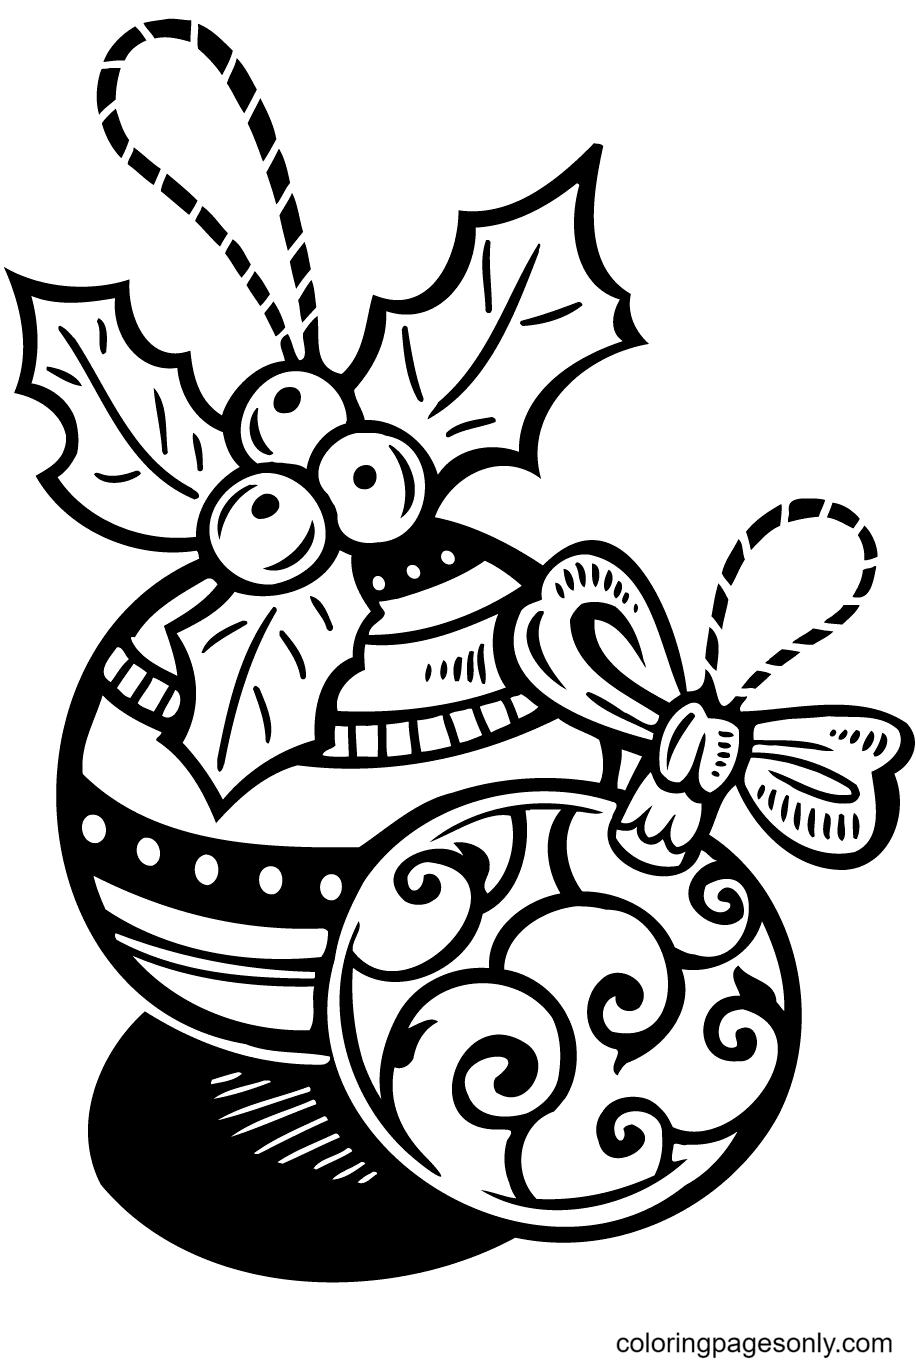 Christmas Ball Decorations Free Coloring Pages